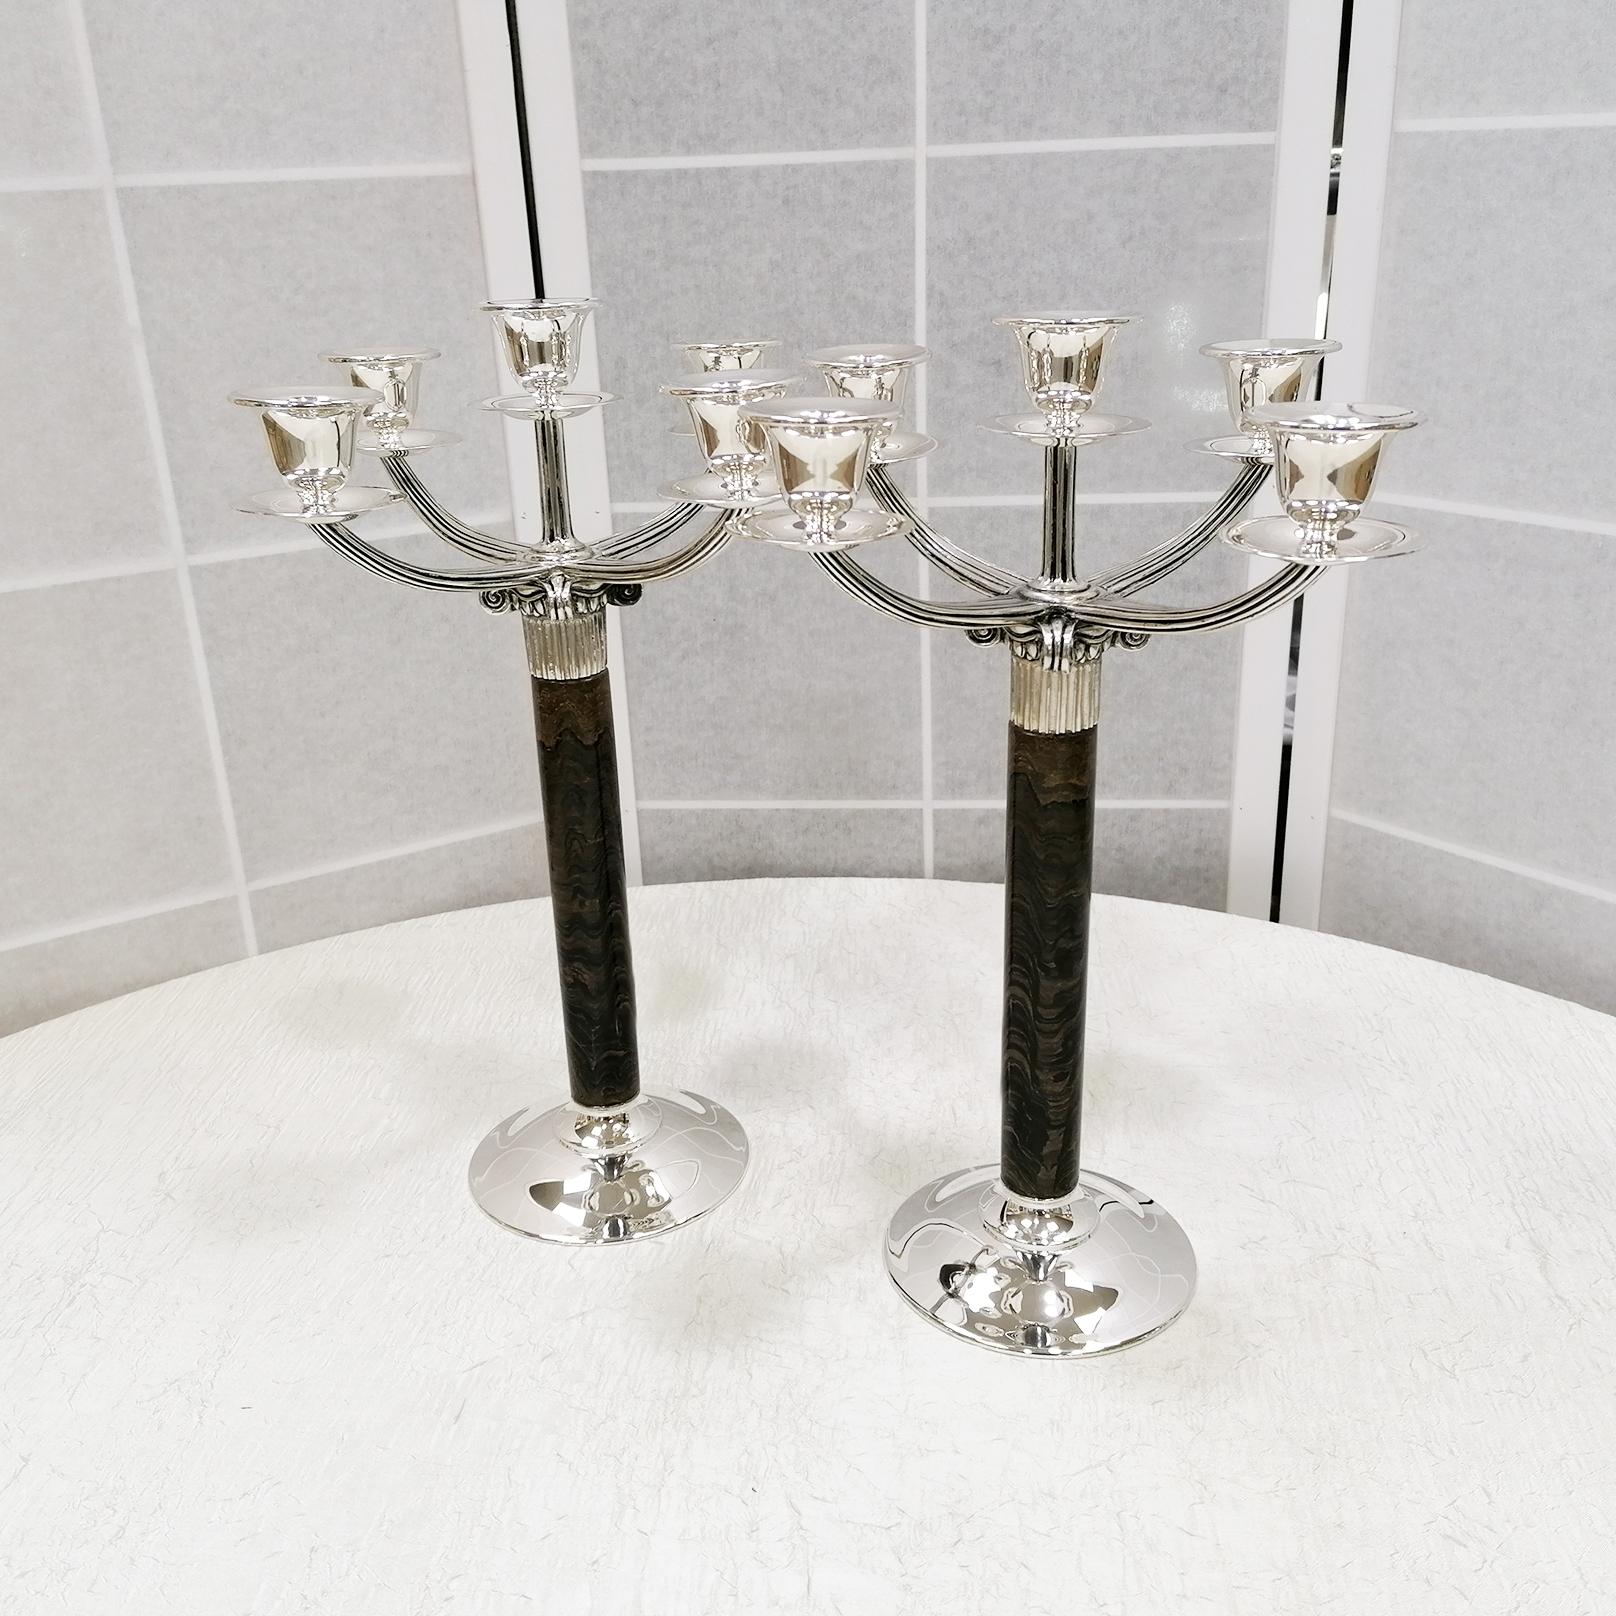 20th Century Italian Sterling Silver Pair Candelabras Neoclassical Style For Sale 1